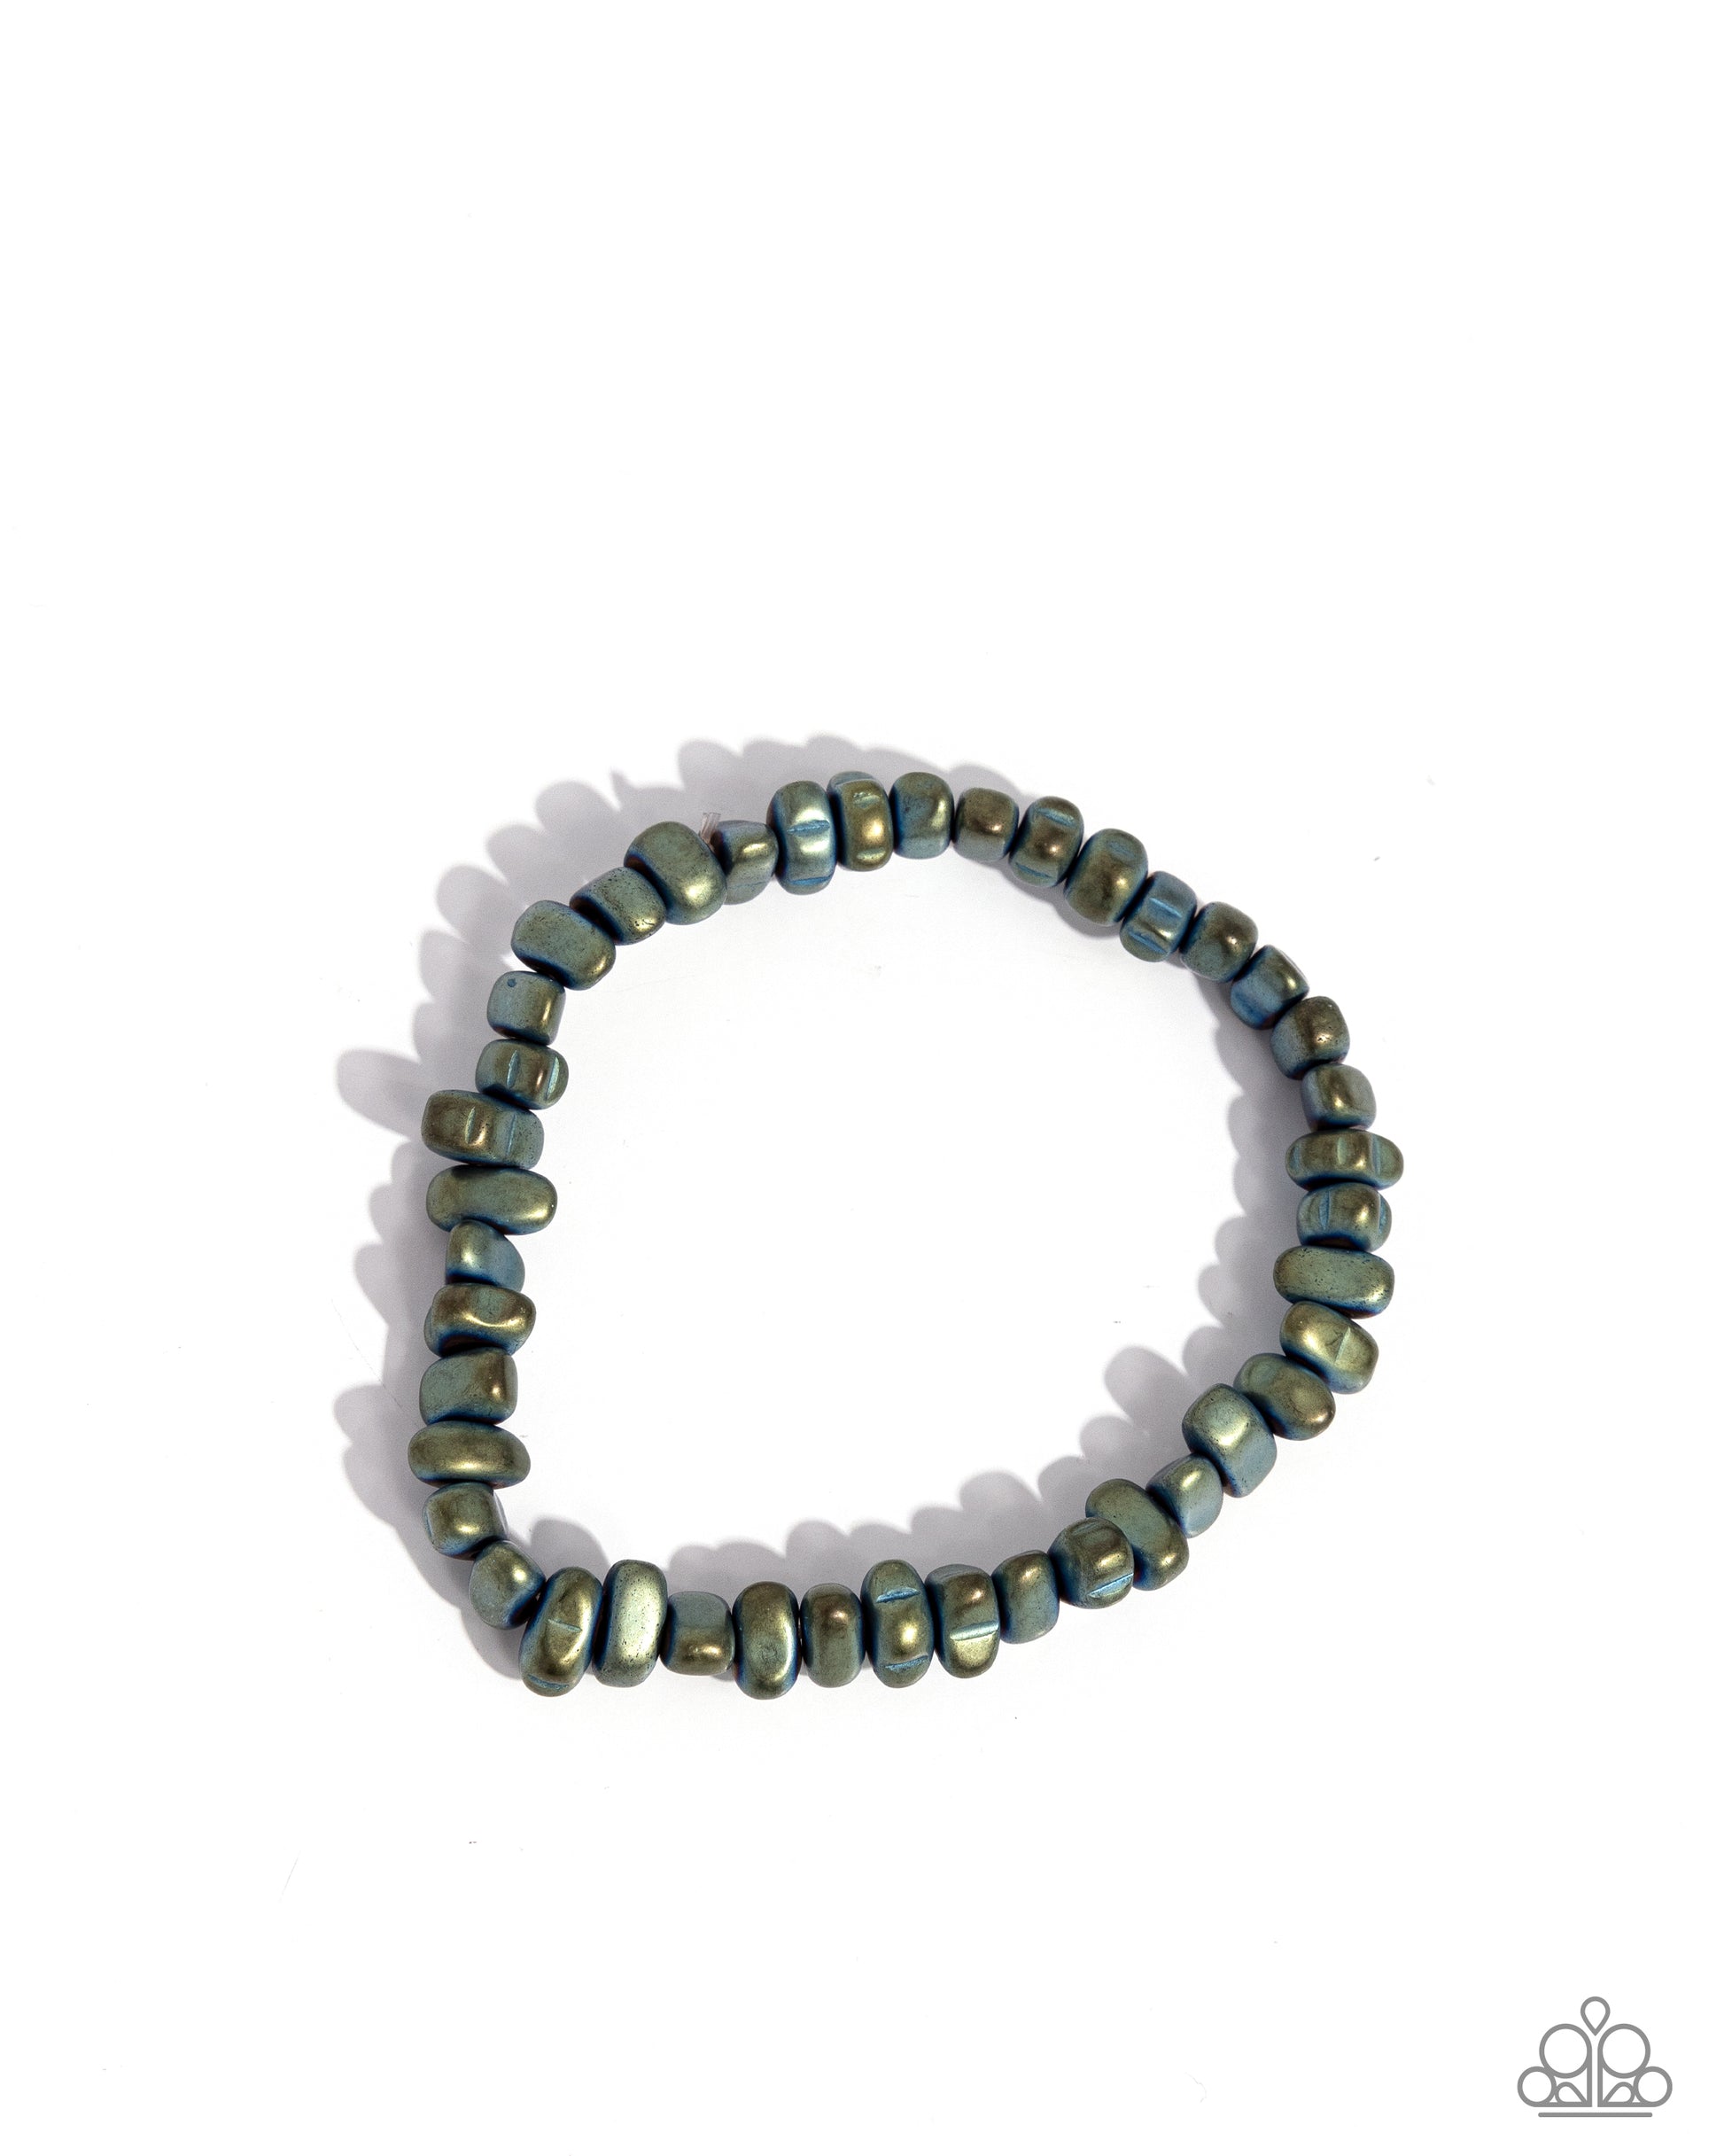 <p>Infused along an elastic stretchy band, a collection of matte green pebbles loops around the wrist for an unapologetically urban statement.</p> <p><i>Sold as one individual bracelet.</i></p>